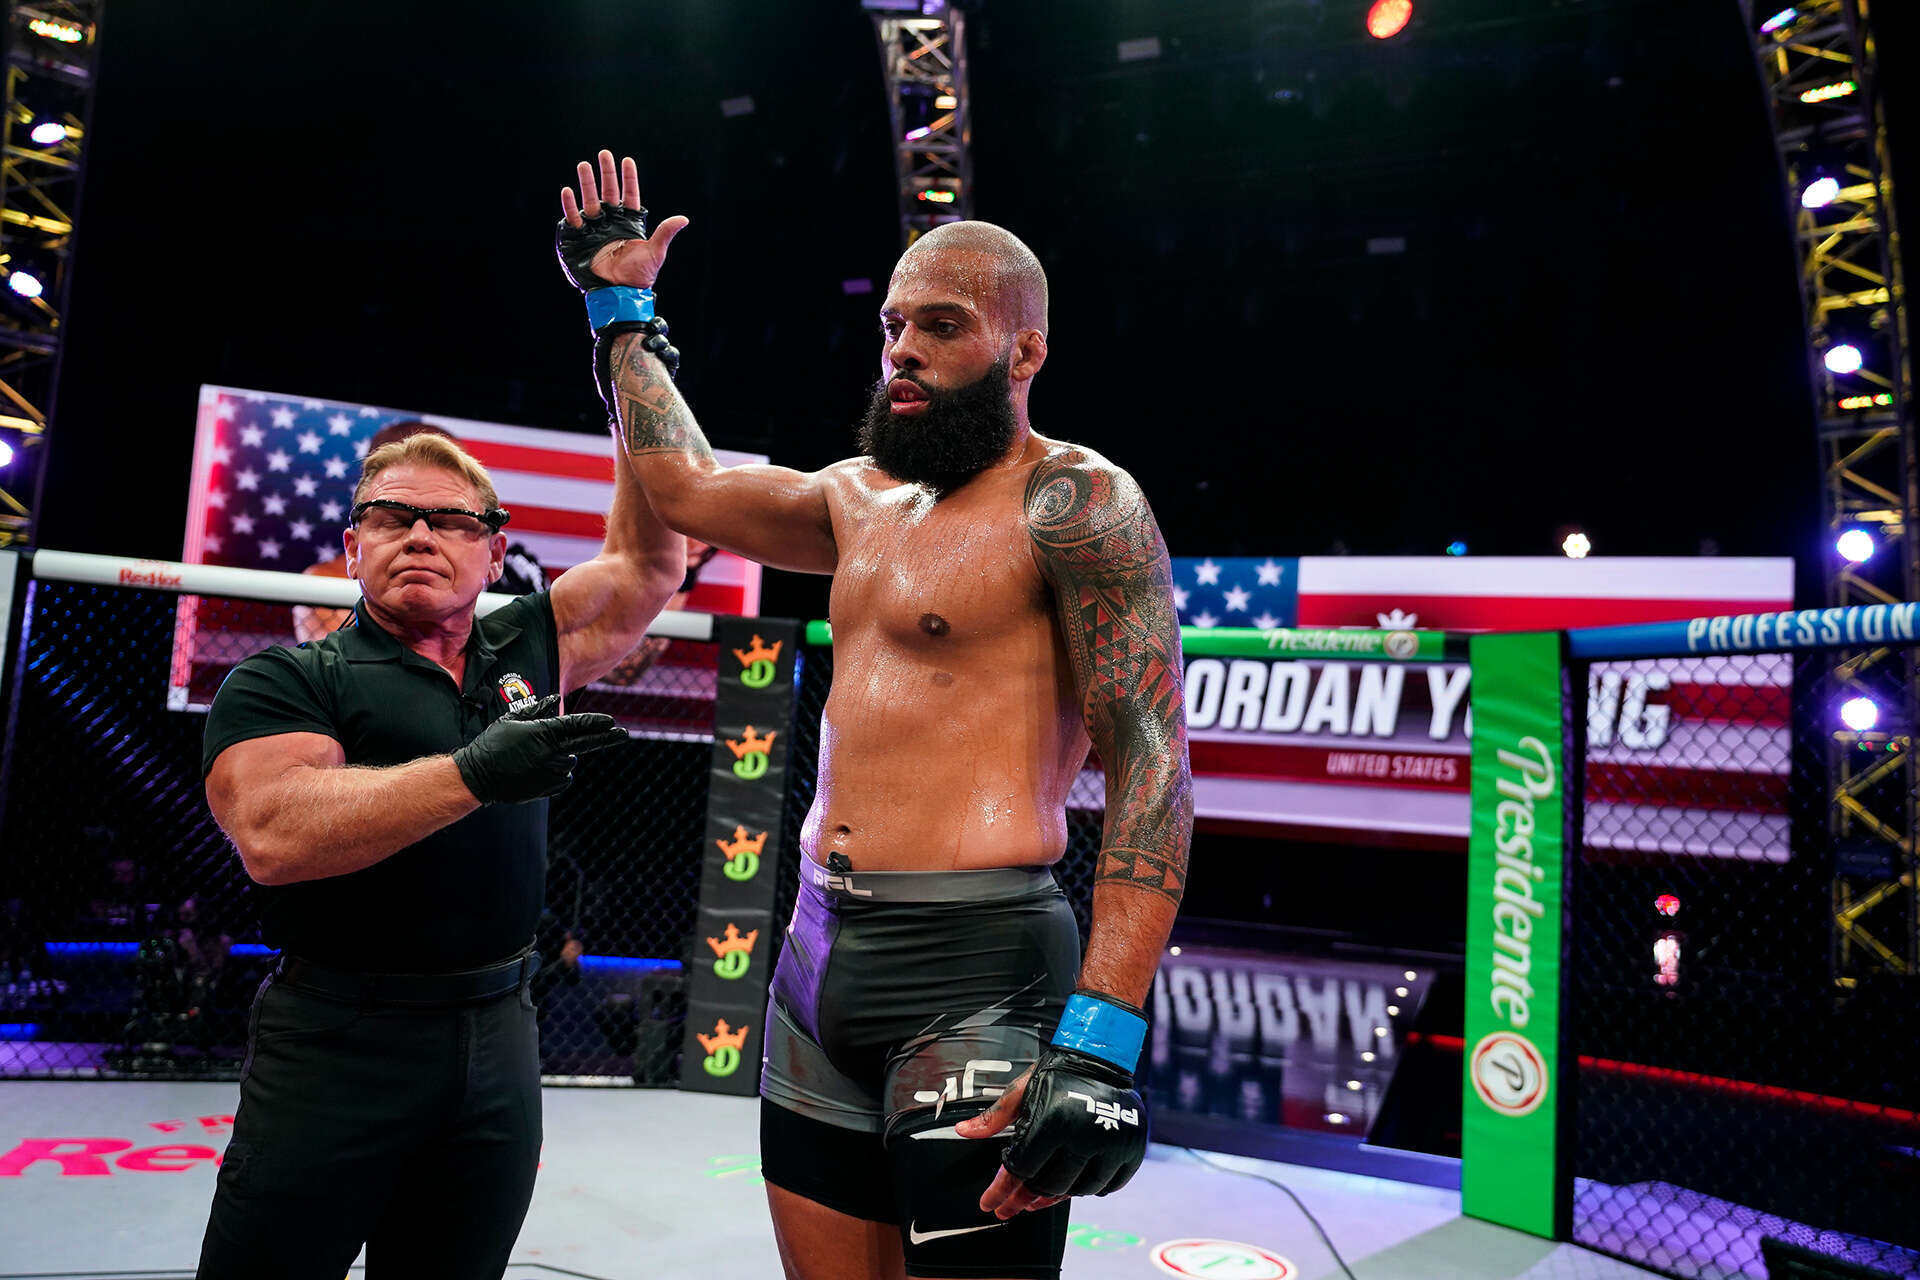 Jordan Young’s arm is raised in victory after beating Omari Akhmedov. Photo: PFL